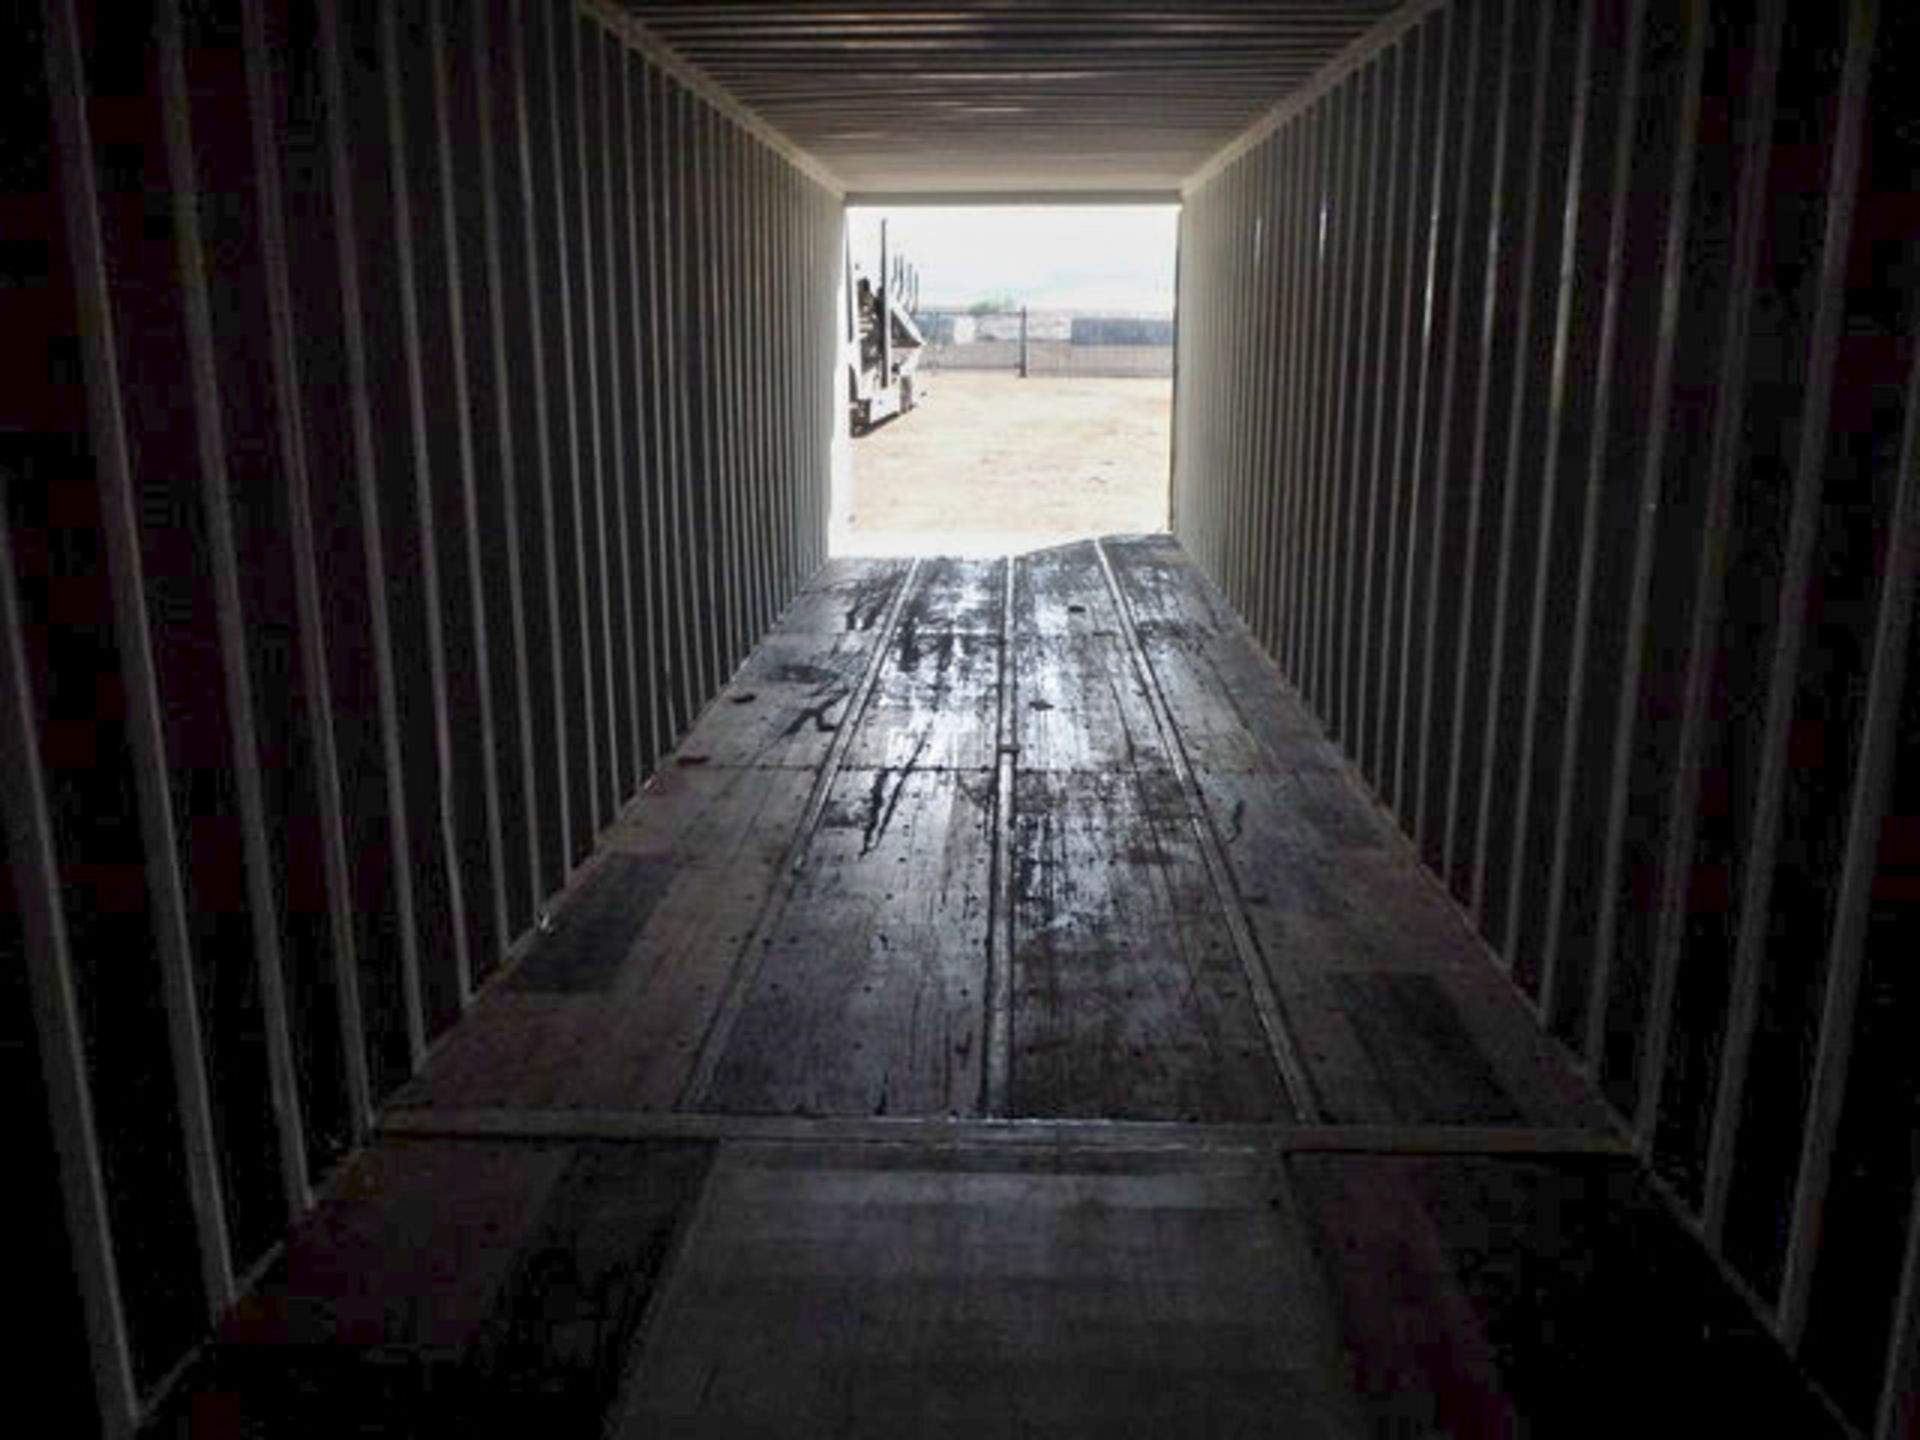 2008 USED 40 X 8 X 8 SHIPPING CONTAINER, S/N EGHU1002084 - Image 7 of 7